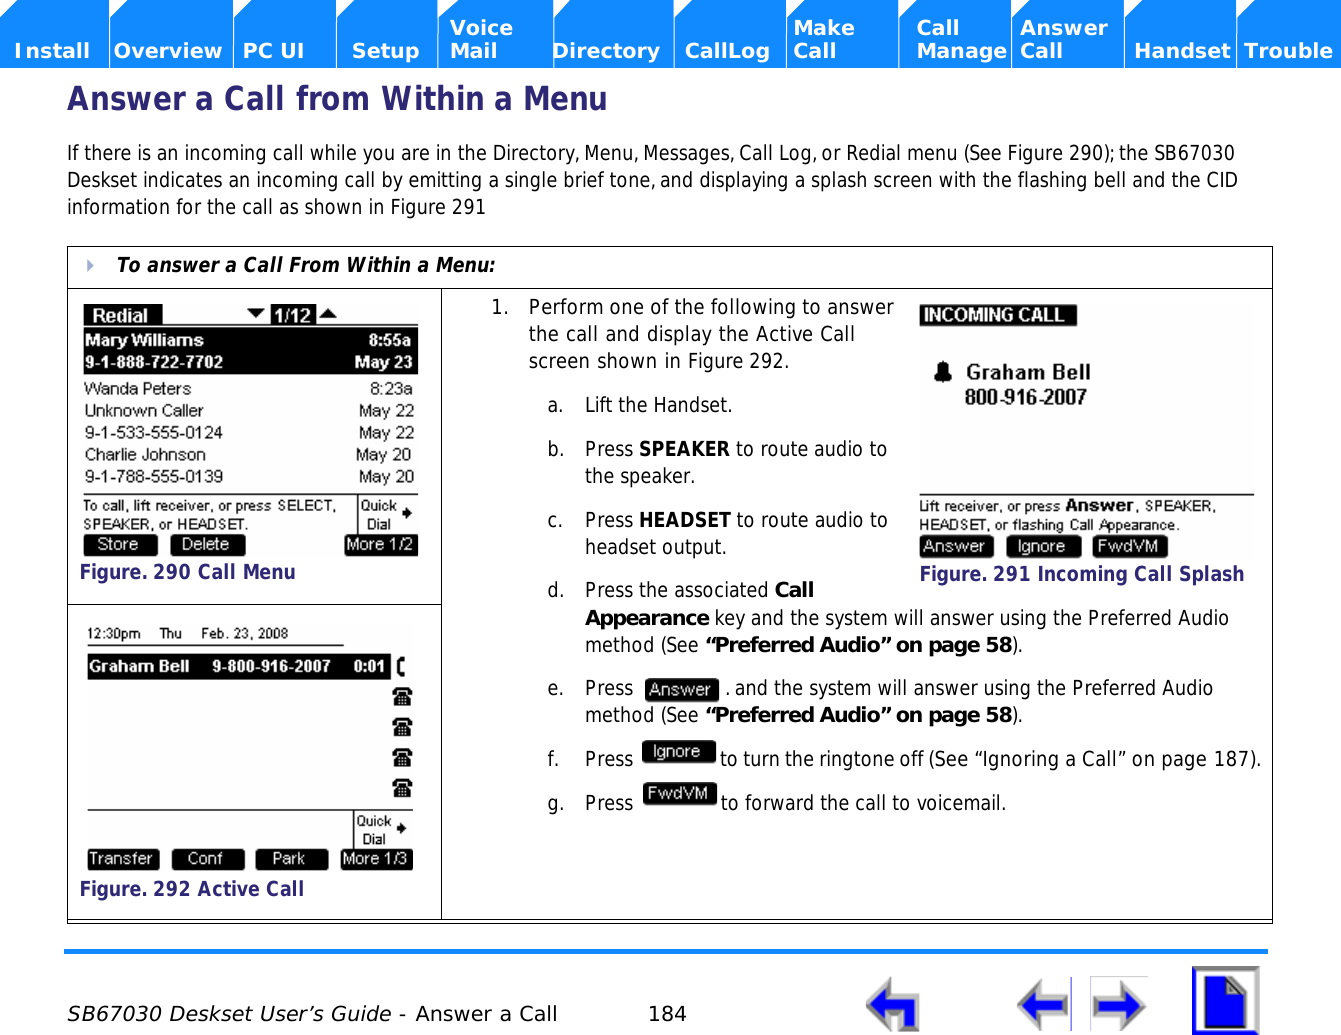  SB67030 Deskset User’s Guide - Answer a Call 184    Voice Make Call Answer  Install Overview PC UI Setup Mail Directory CallLog Call Manage Call Handset TroubleAnswer a Call from Within a MenuIf there is an incoming call while you are in the Directory, Menu, Messages, Call Log, or Redial menu (See Figure 290); the SB67030 Deskset indicates an incoming call by emitting a single brief tone, and displaying a splash screen with the flashing bell and the CID information for the call as shown in Figure 291  To answer a Call From Within a Menu:1. Perform one of the following to answer the call and display the Active Call screen shown in Figure 292.a. Lift the Handset.b. Press SPEAKER to route audio to the speaker.c. Press HEADSET to route audio to headset output.d. Press the associated Call Appearance key and the system will answer using the Preferred Audio method (See “Preferred Audio” on page 58).e. Press  . and the system will answer using the Preferred Audio method (See “Preferred Audio” on page 58).f. Press  to turn the ringtone off (See “Ignoring a Call” on page 187).g. Press  to forward the call to voicemail. Figure. 290 Call MenuFigure. 291 Incoming Call SplashFigure. 292 Active Call